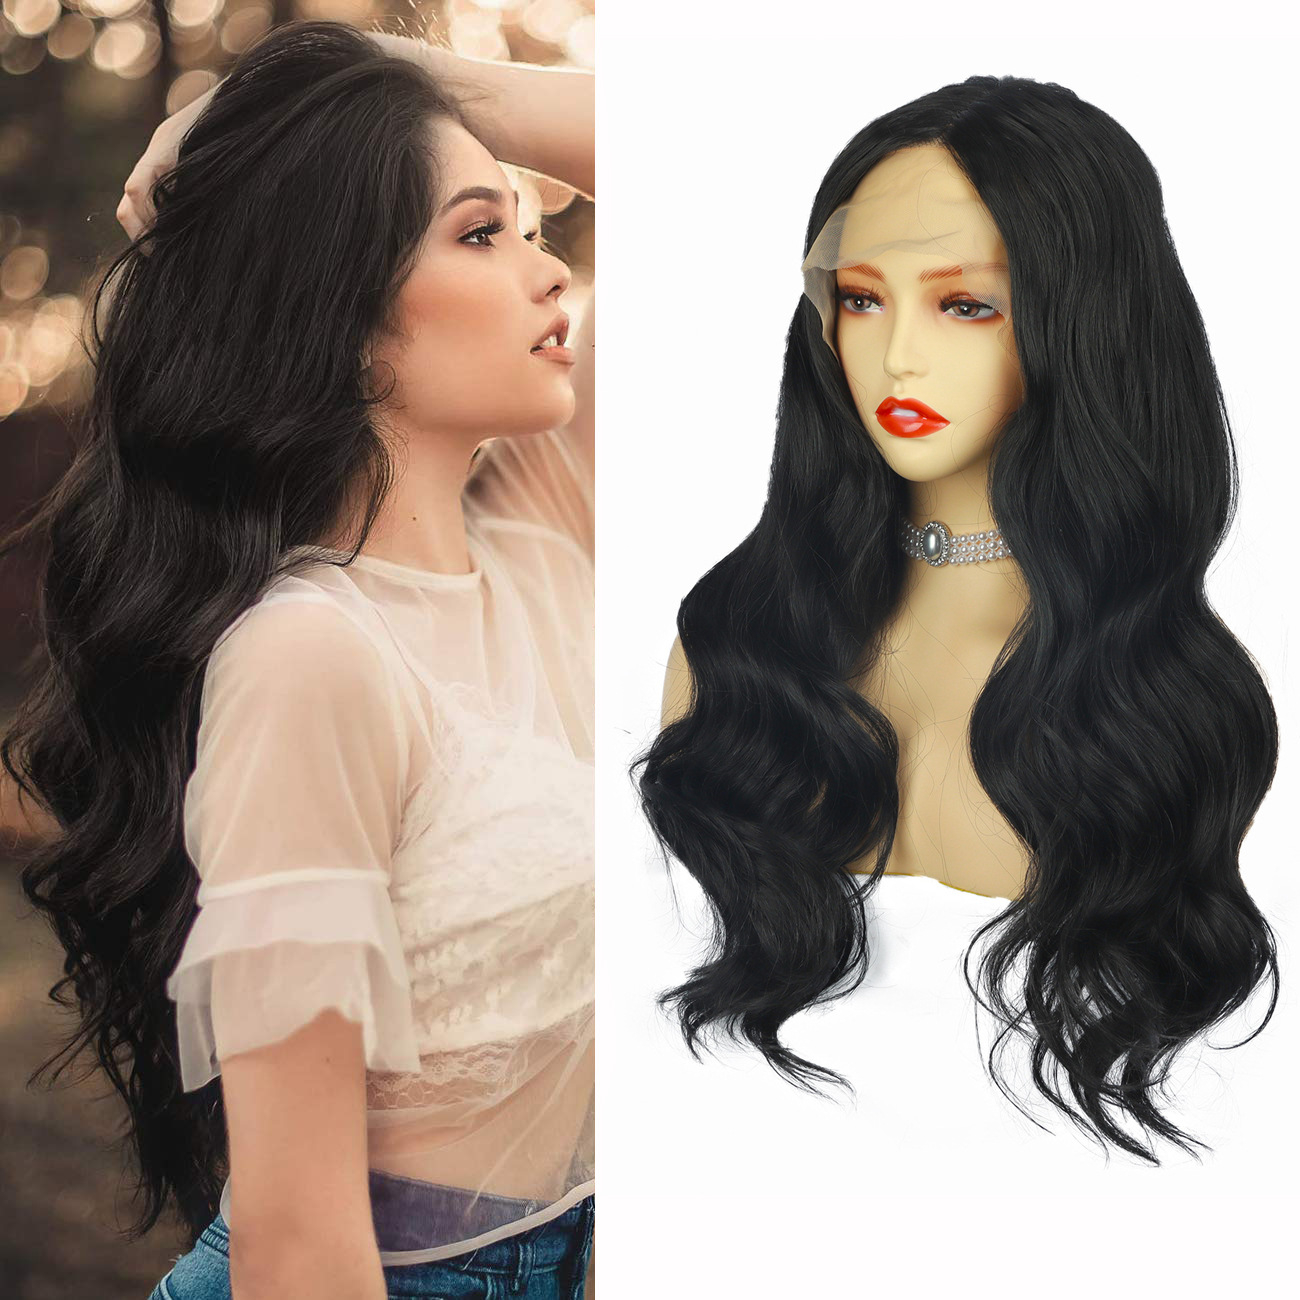 Lace Front Fiber Hair Wigs Brazilian Body Wave Lace Front Wig Full Hd Lace Frontal 28 Inch Loose Body Wave Wig Lace Wigs For Women Human Hair Closure Wig